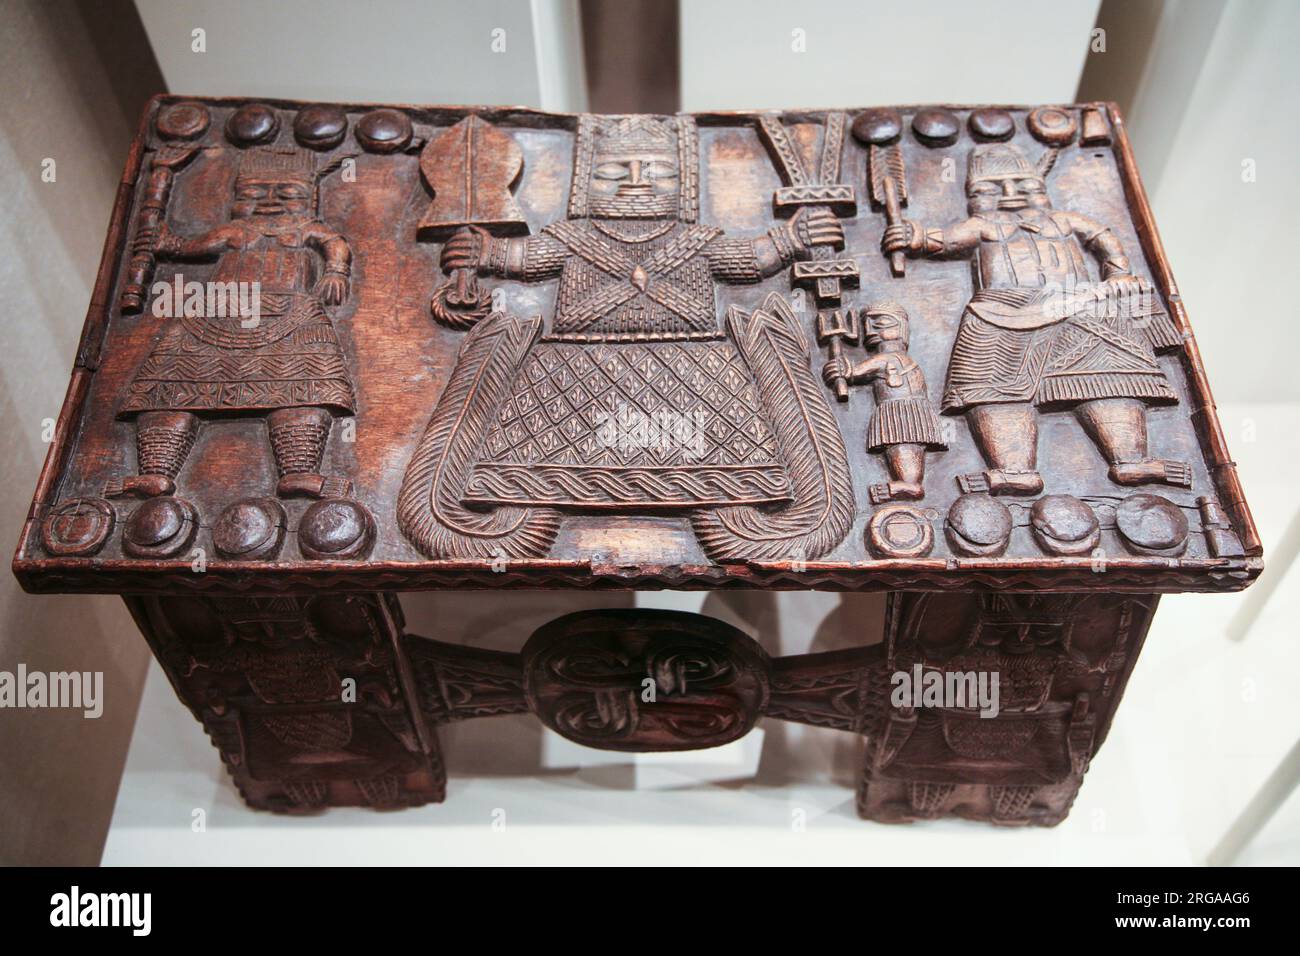 African art exhibition at the Metropolitan Museum of Art, hand carved wooden table depicting king and warriors, New York City, USA Stock Photo